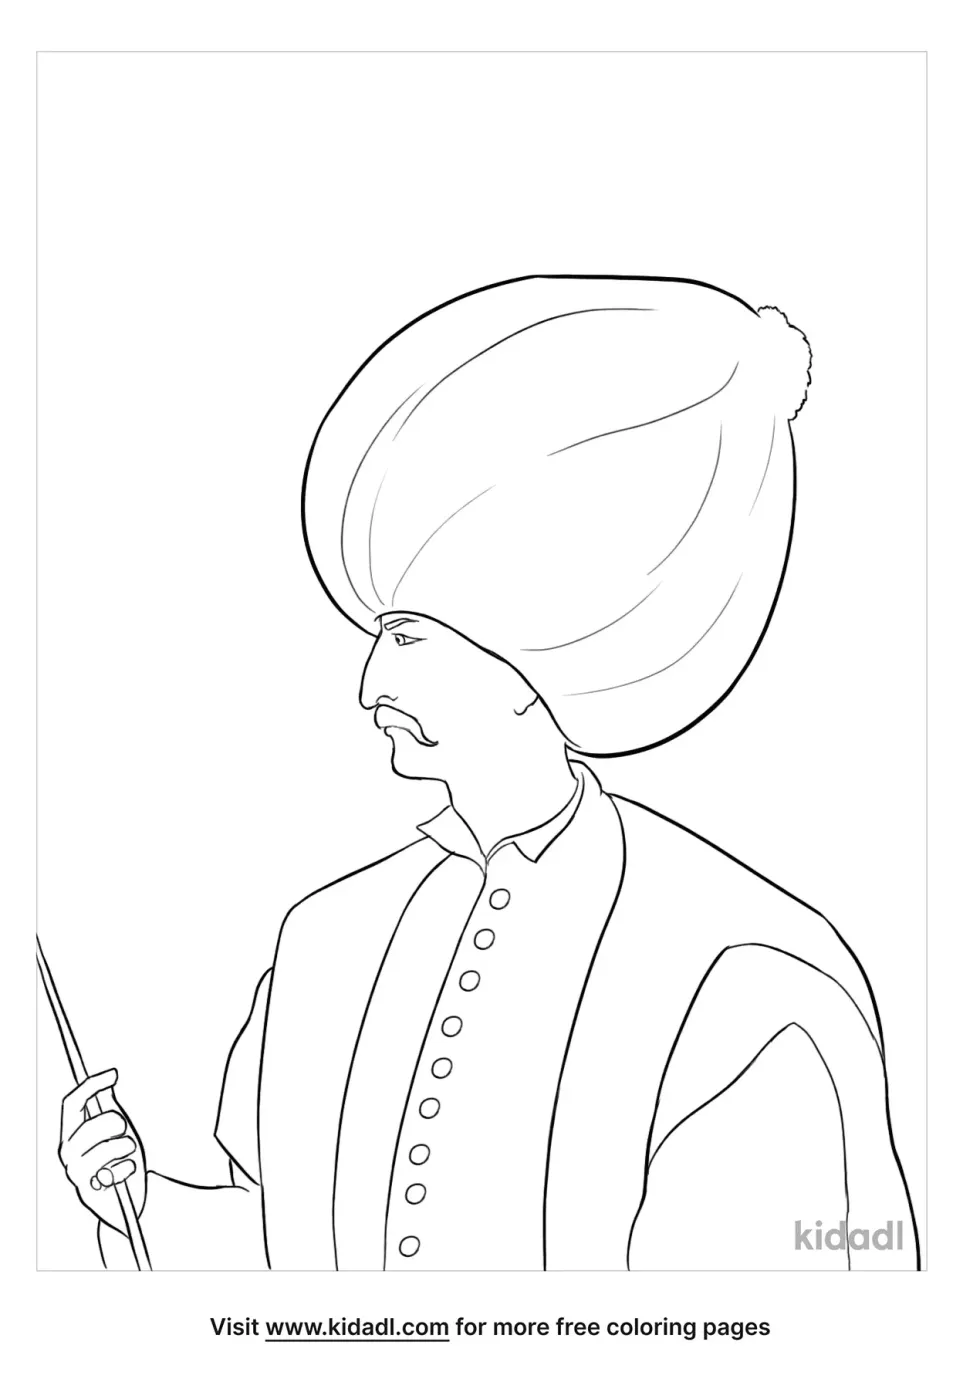 Suleiman The Lawgiver Coloring Page